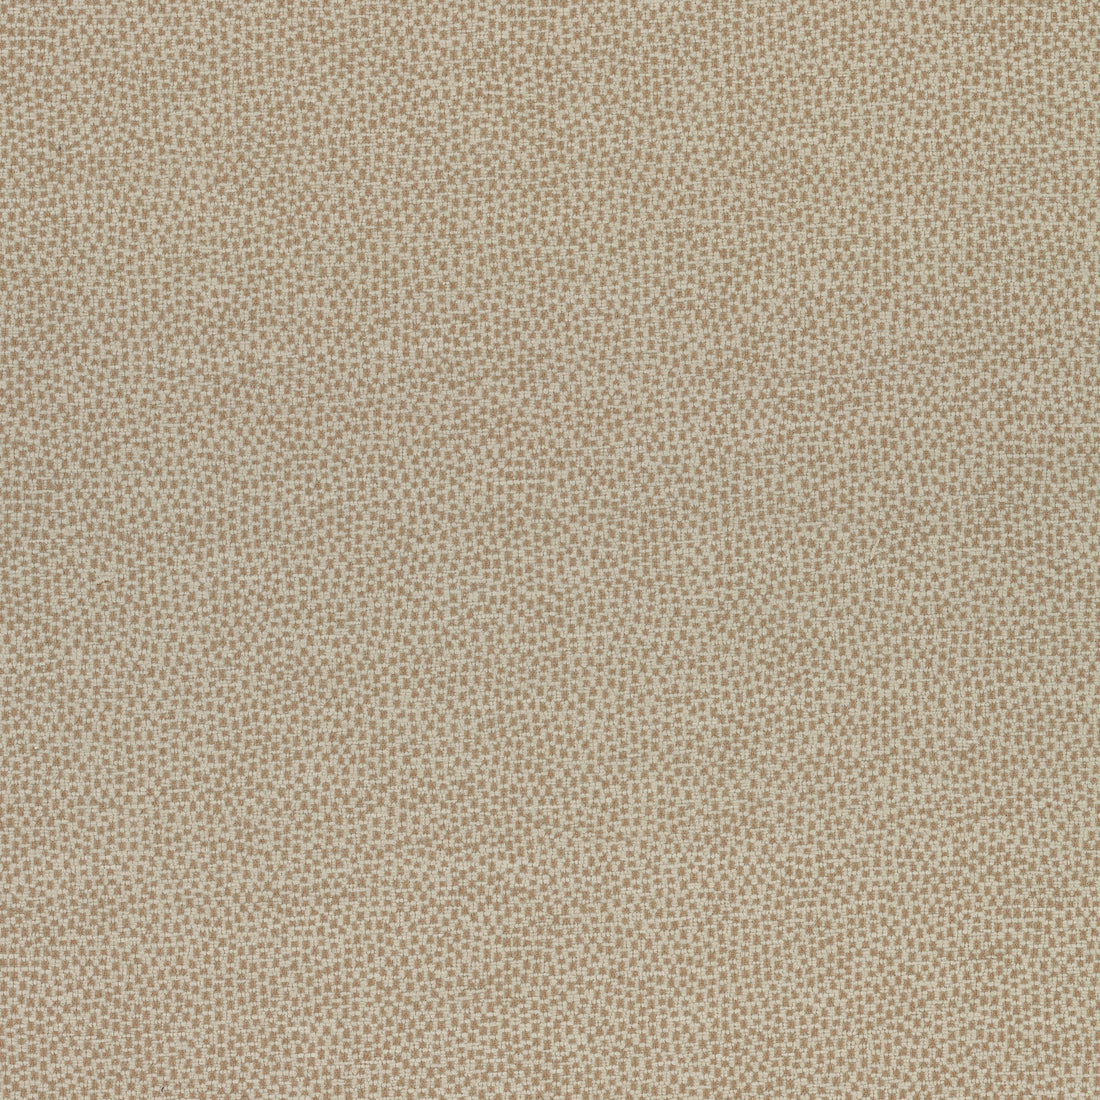 Nala fabric in sand color - pattern number W74076 - by Thibaut in the Cadence collection